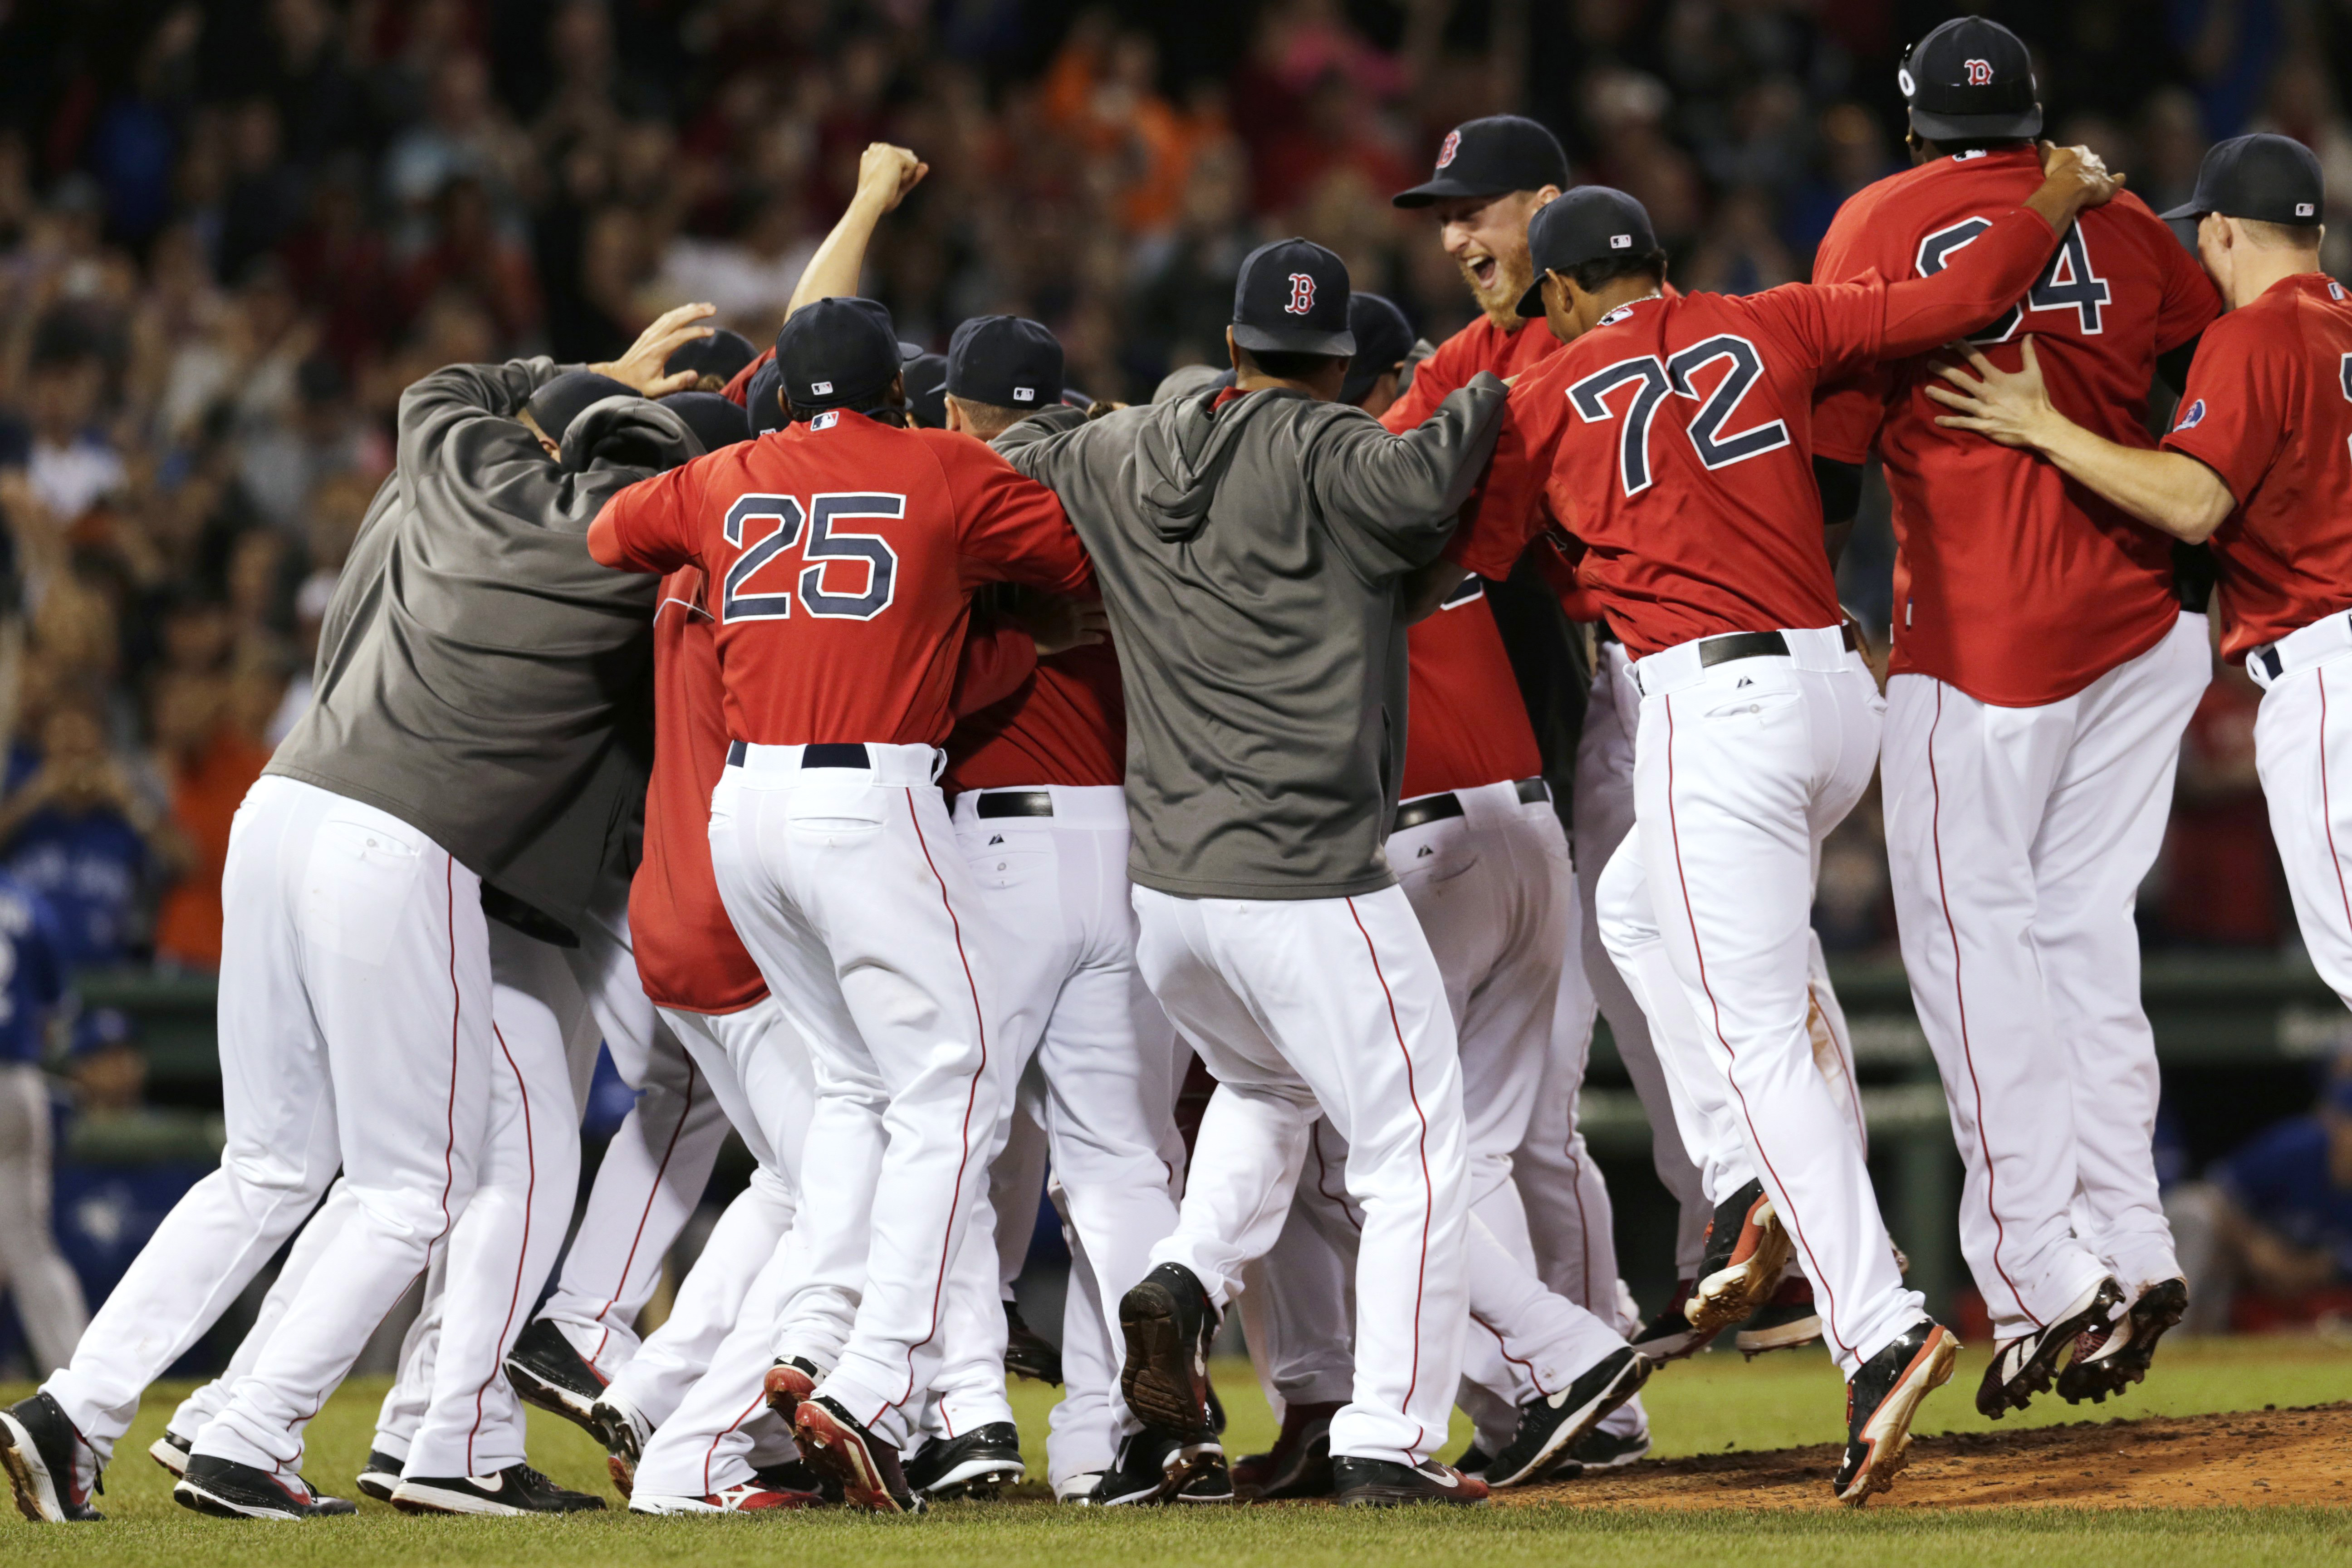 The Boston Red Sox celebrate after clinching the AL East with a 6-3 win over the Toronto Blue Jays in a baseball game at Fenway Park, Friday, Sept. 20, 2013, in Boston. (AP Photo/Charles Krupa)